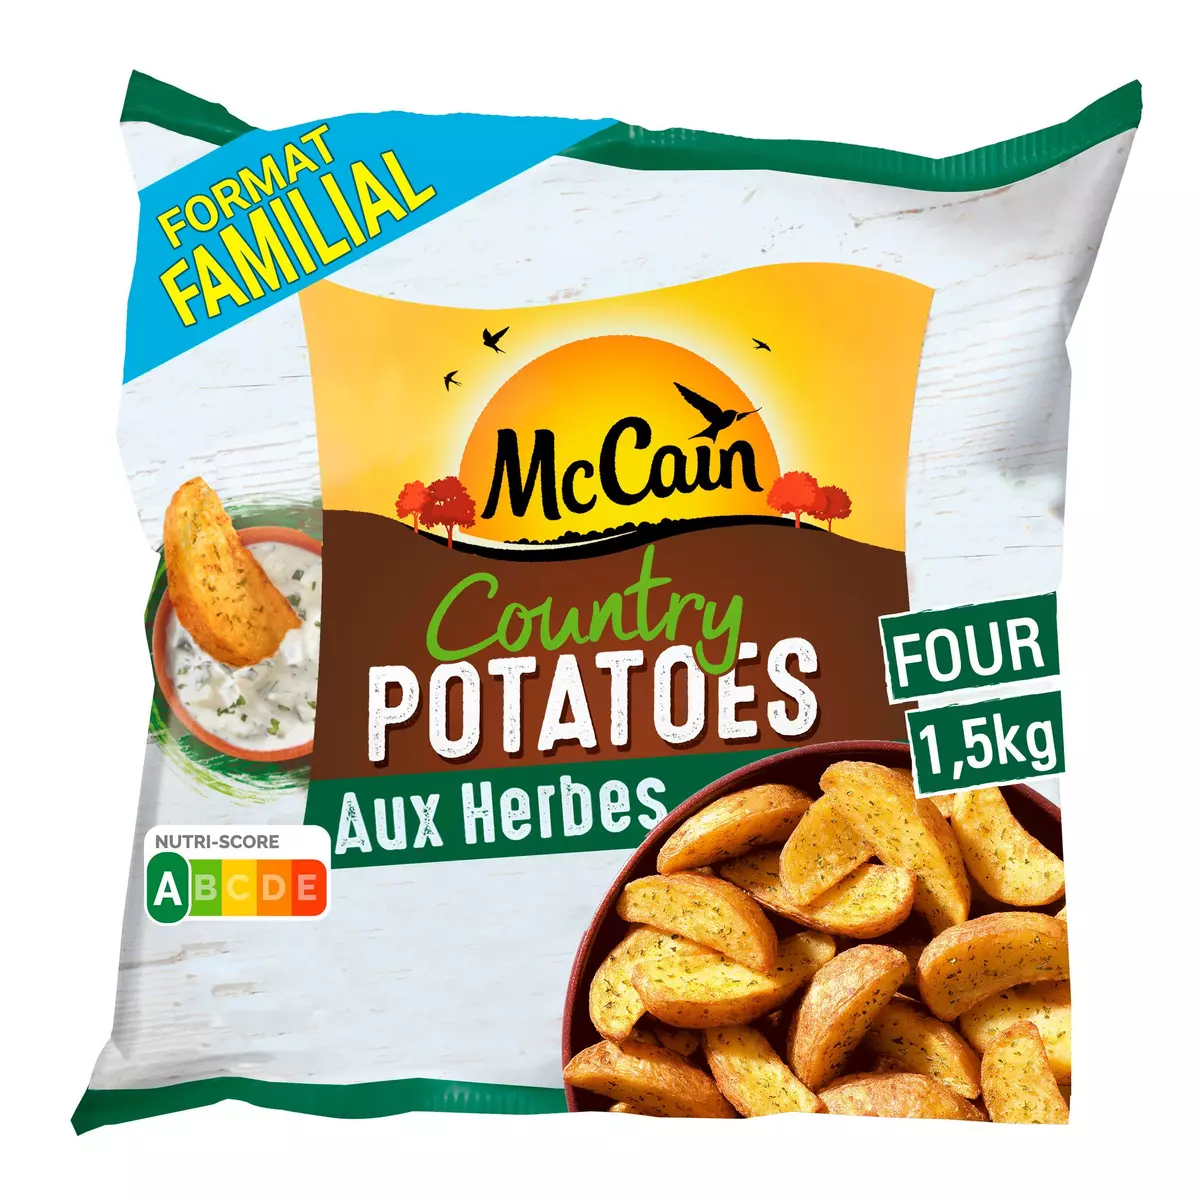 MCCAIN Country potatoes aux herbes 1.5kg